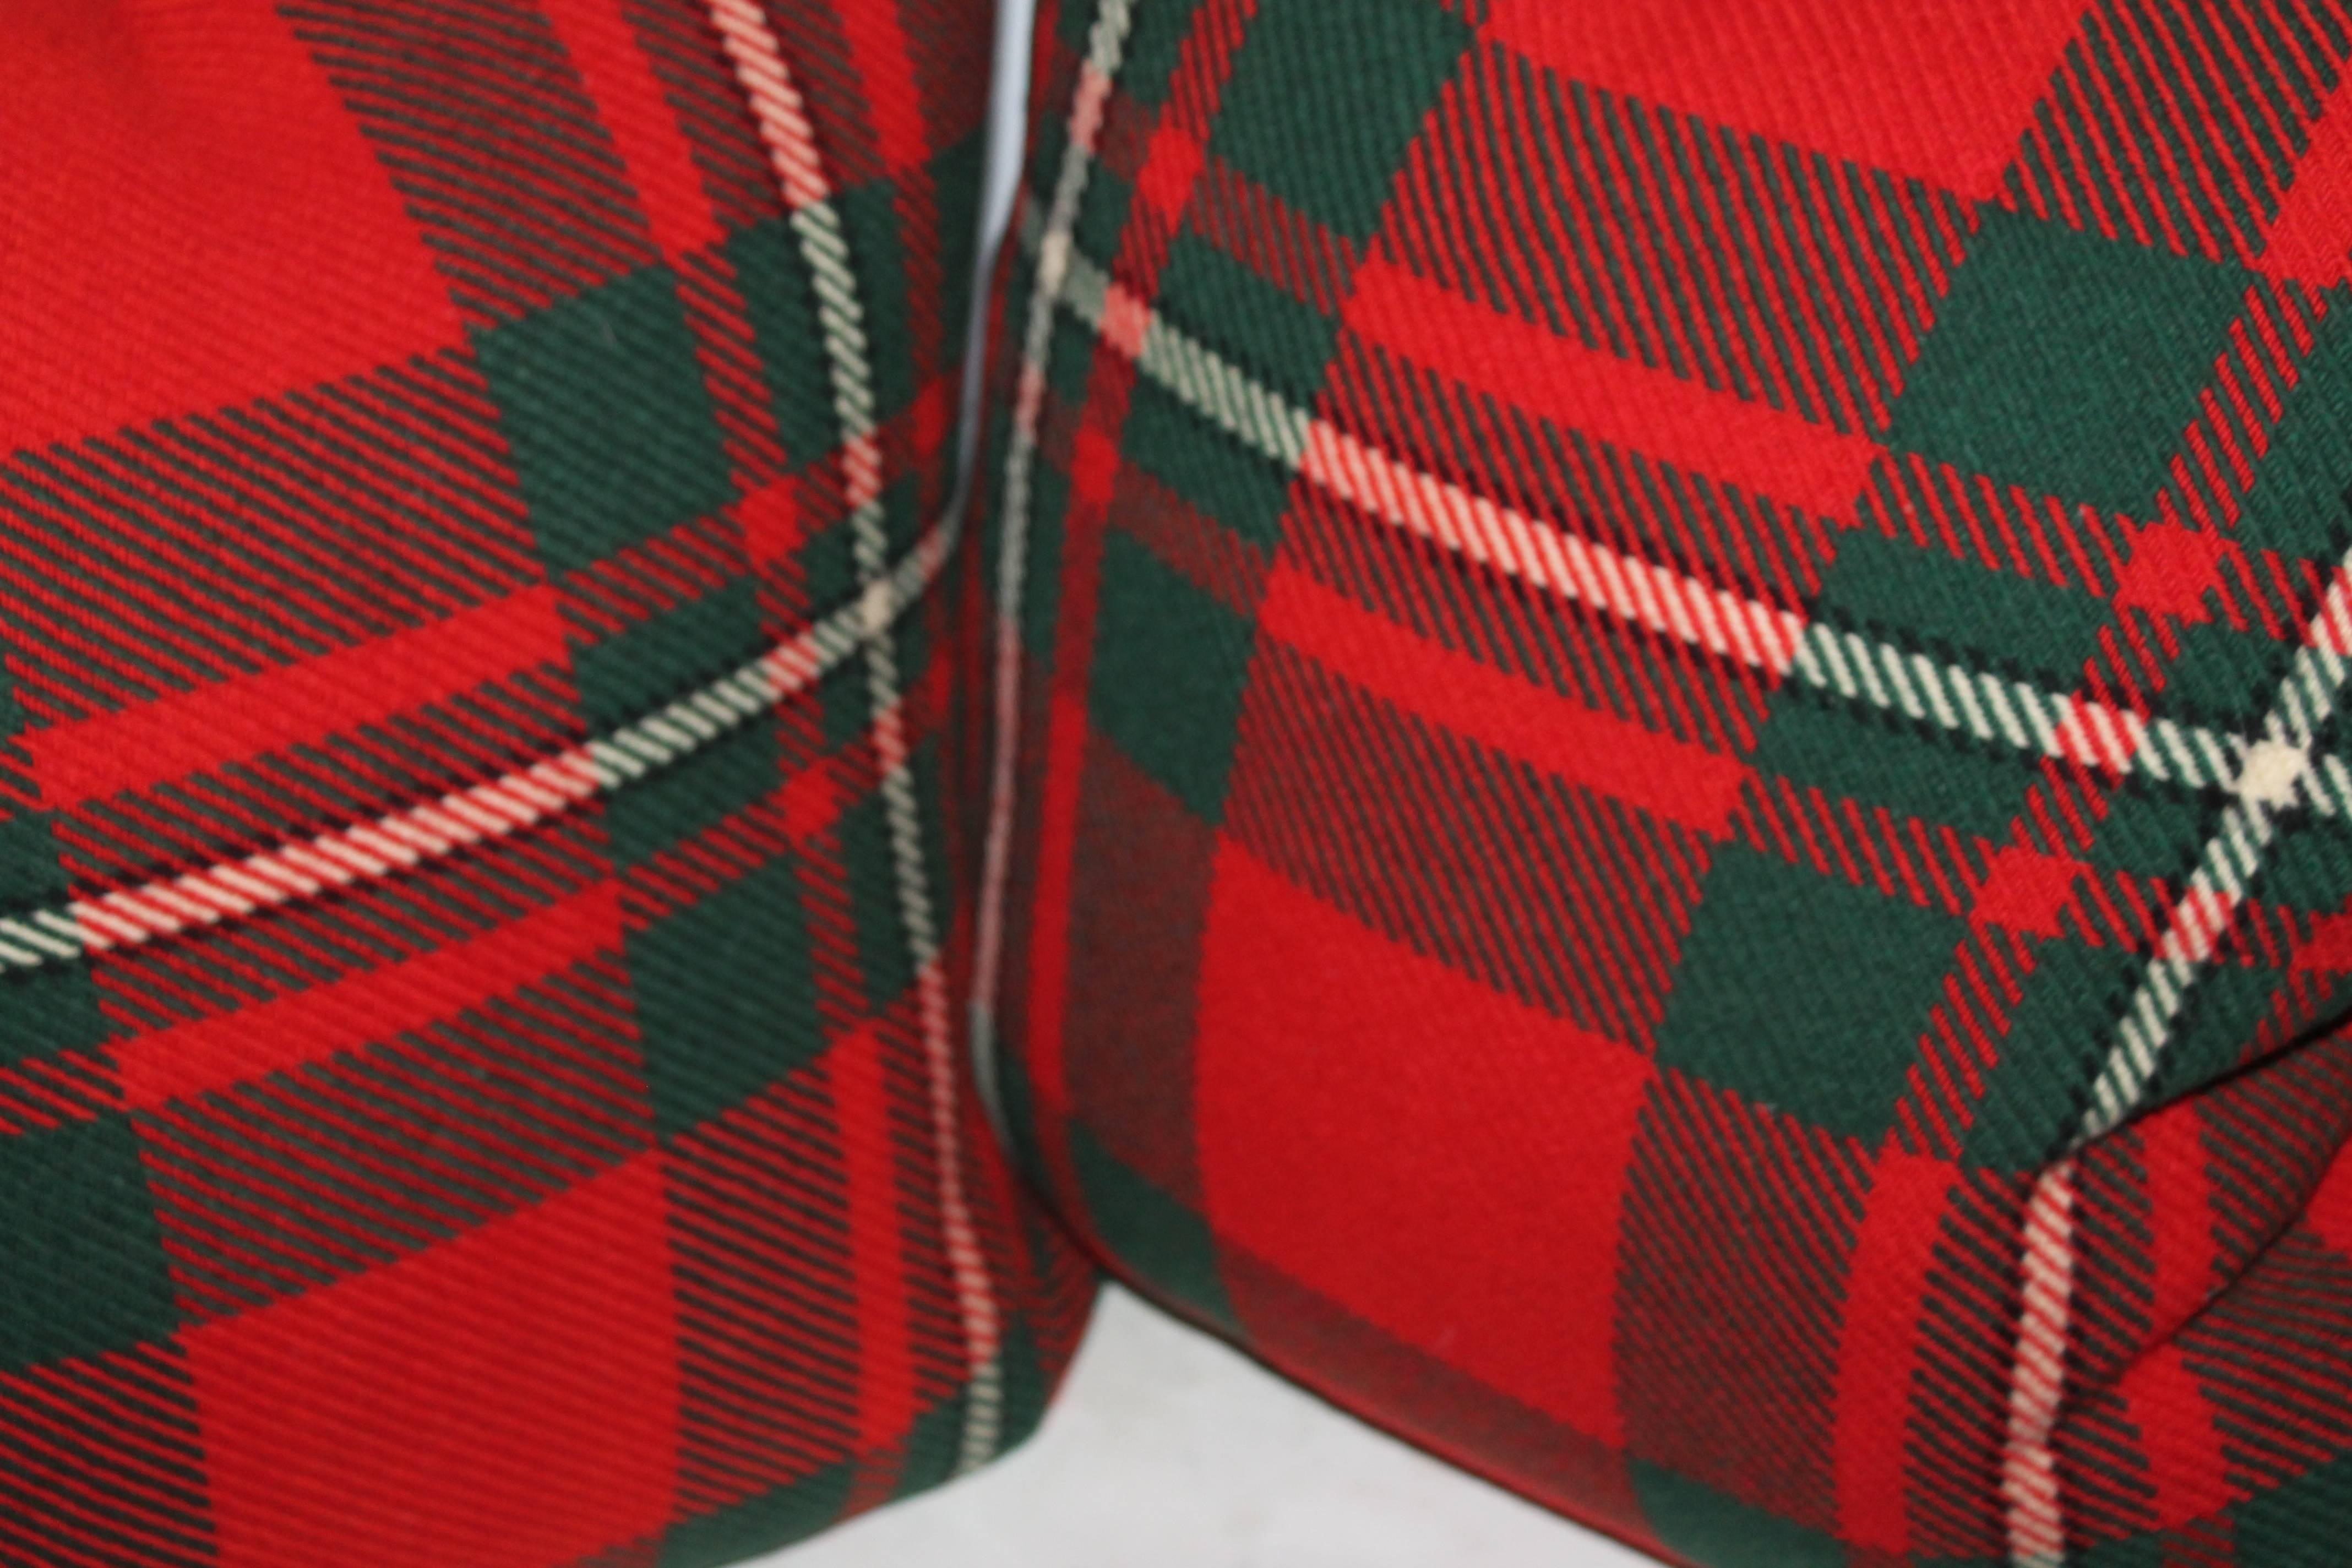 These amazing plaid red and green wool blanket pillows were made from a vintage Pendleton blanket. The condition are very good. Great holiday gift or for your mountain retreat. Two pairs available. Sold in pairs. Nice soft red wool backing.